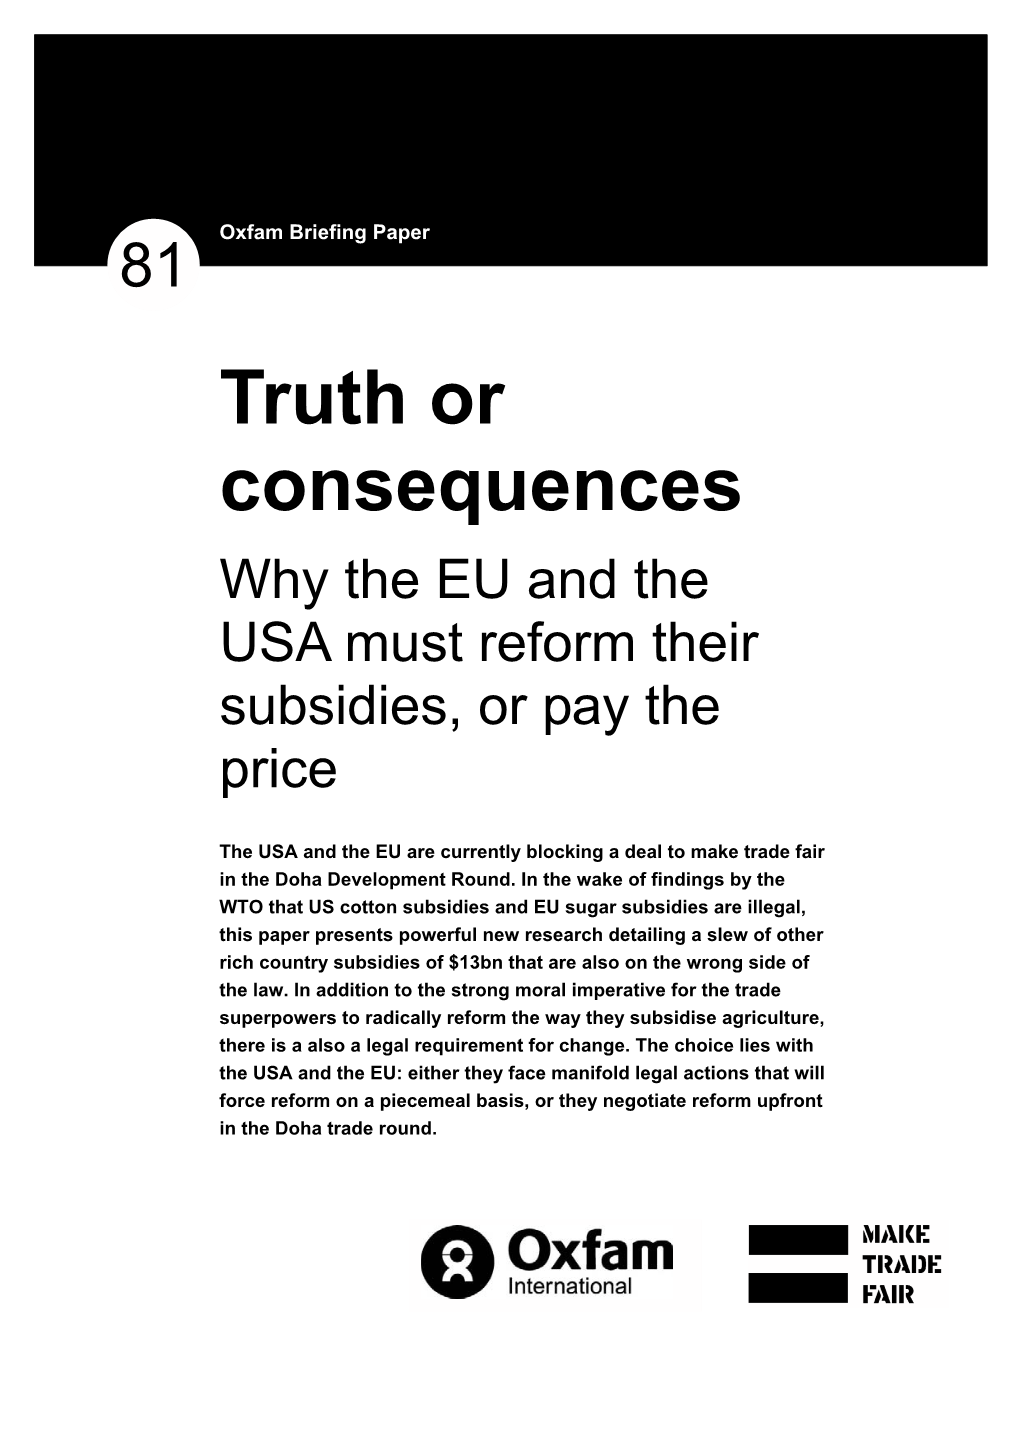 Why the EU and the USA Must Reform Their Subsidies, Or Pay the Price